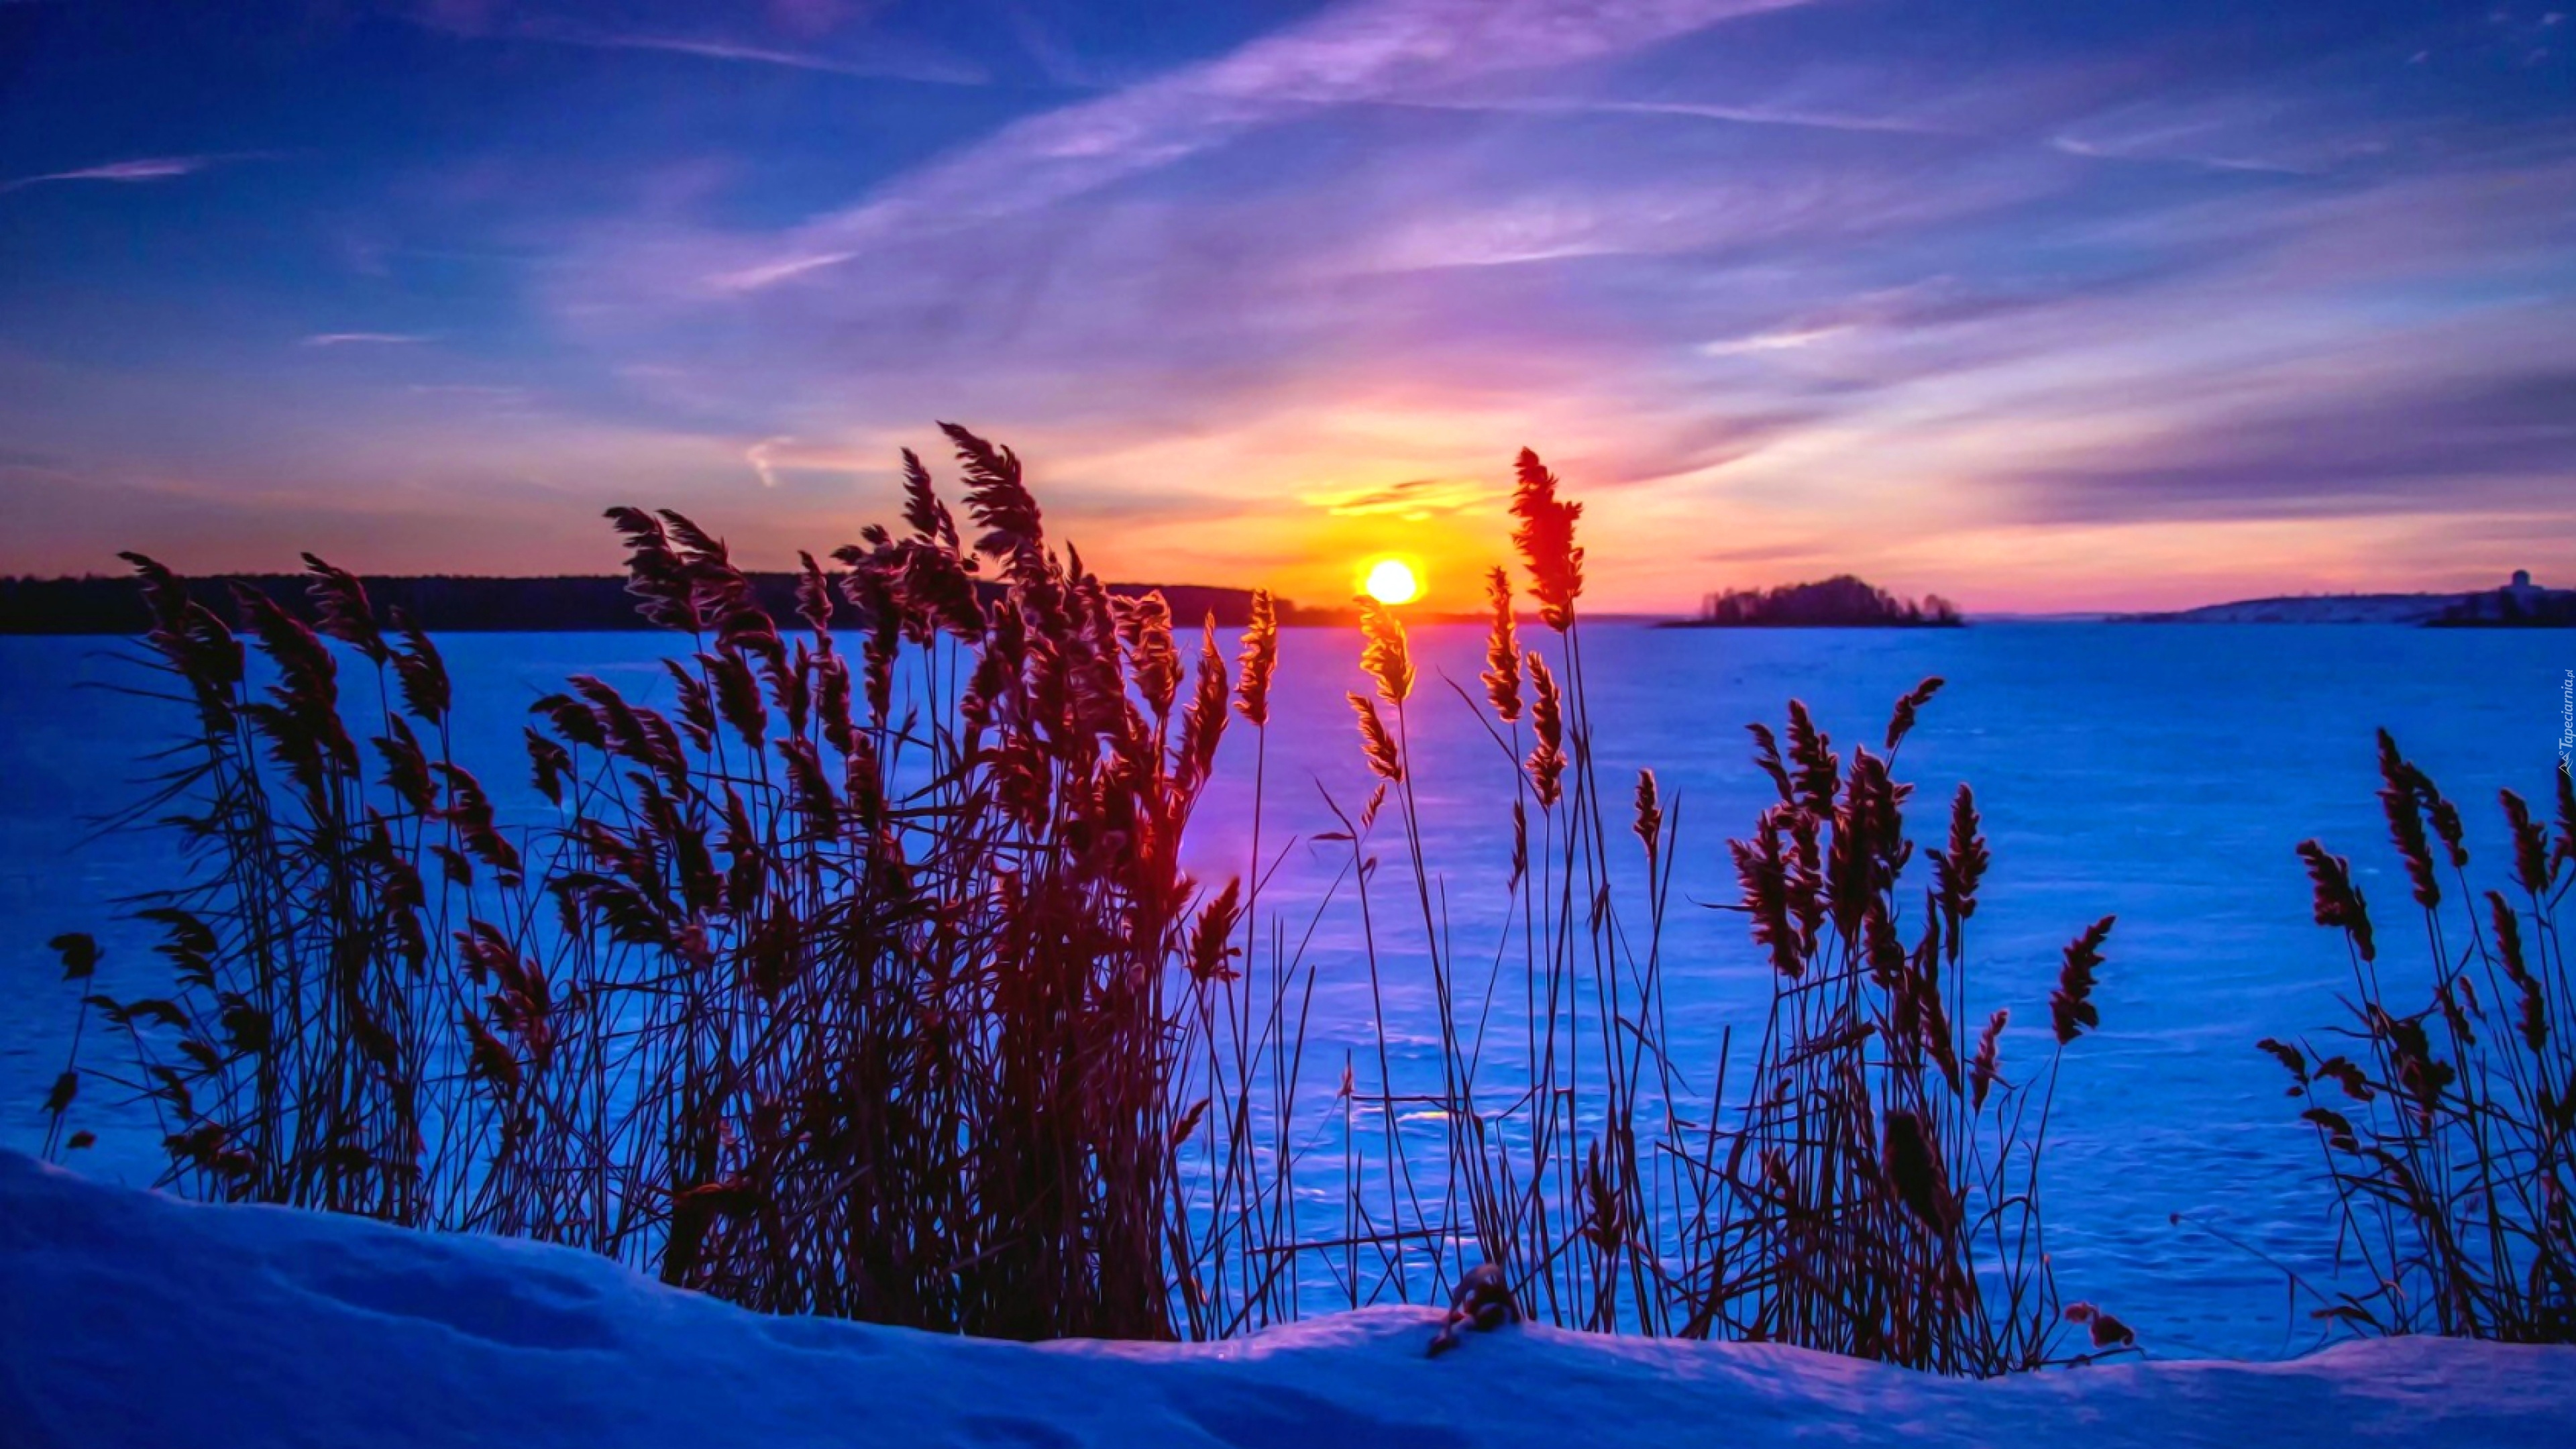 Sunset, Winter, Snow, Nature, Natural Landscape. Wallpaper in 3840x2160 Resolution